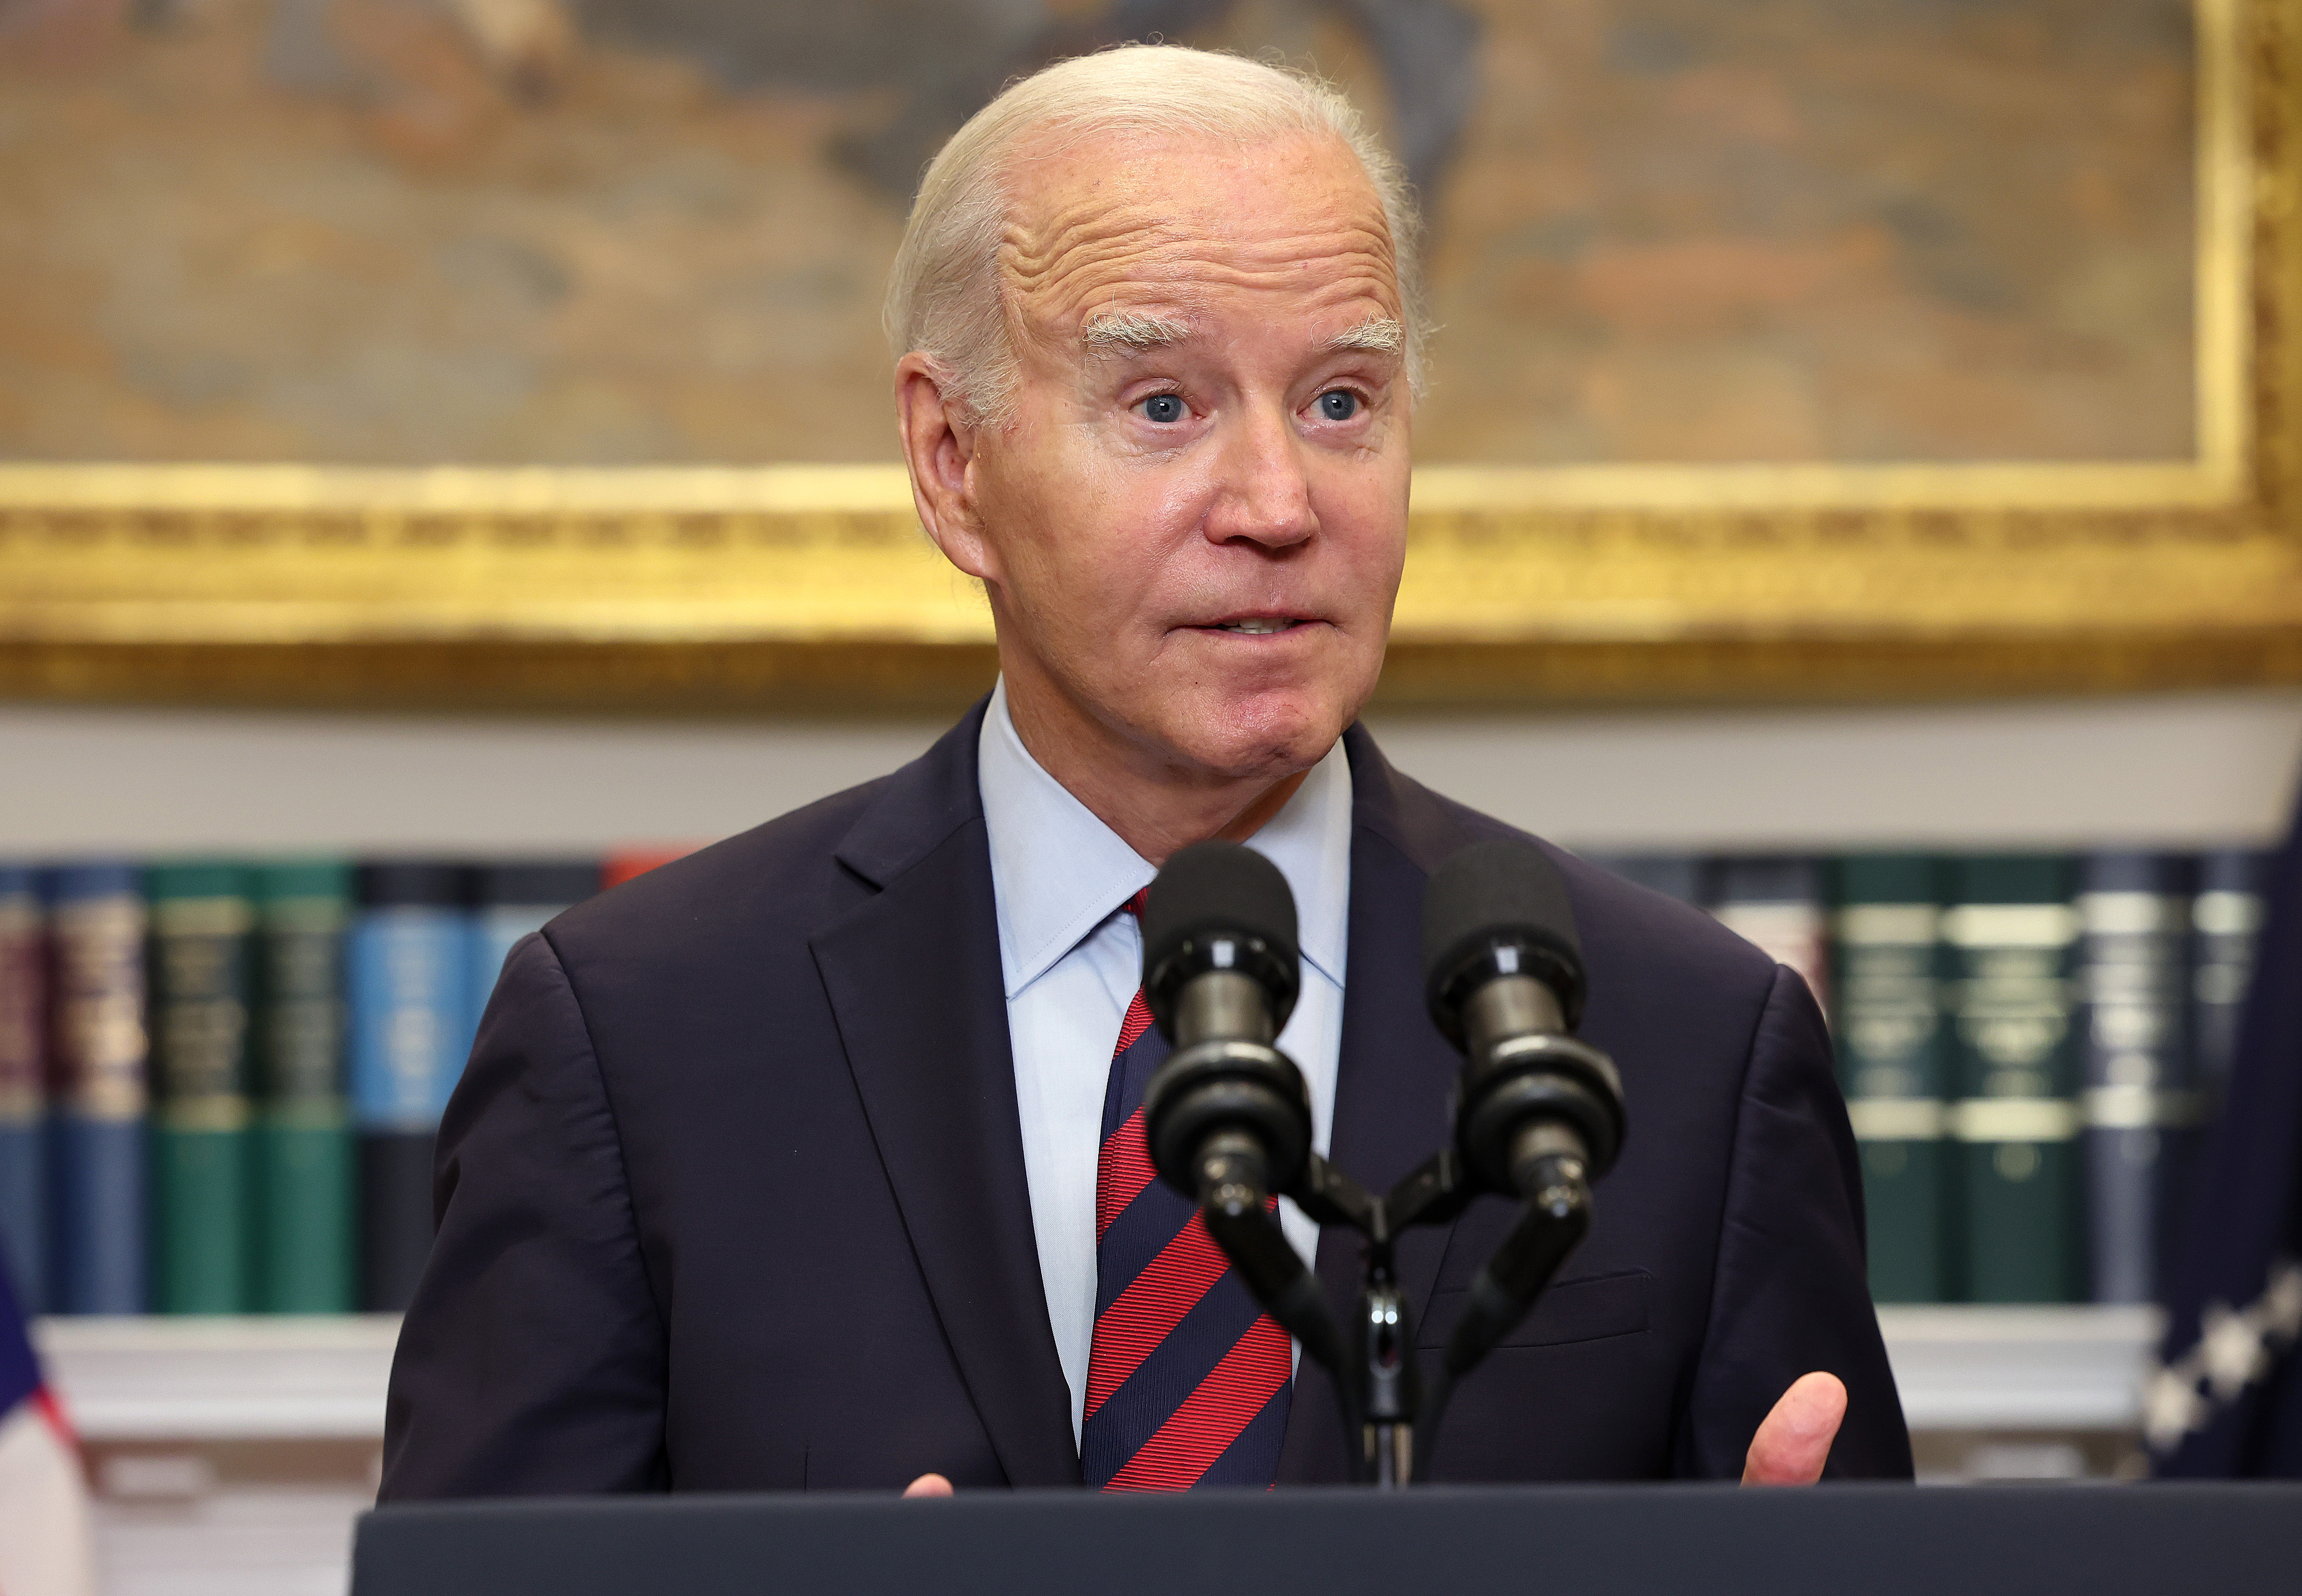 Here's what DC area leaders say about Biden leaving 2024 presidential race